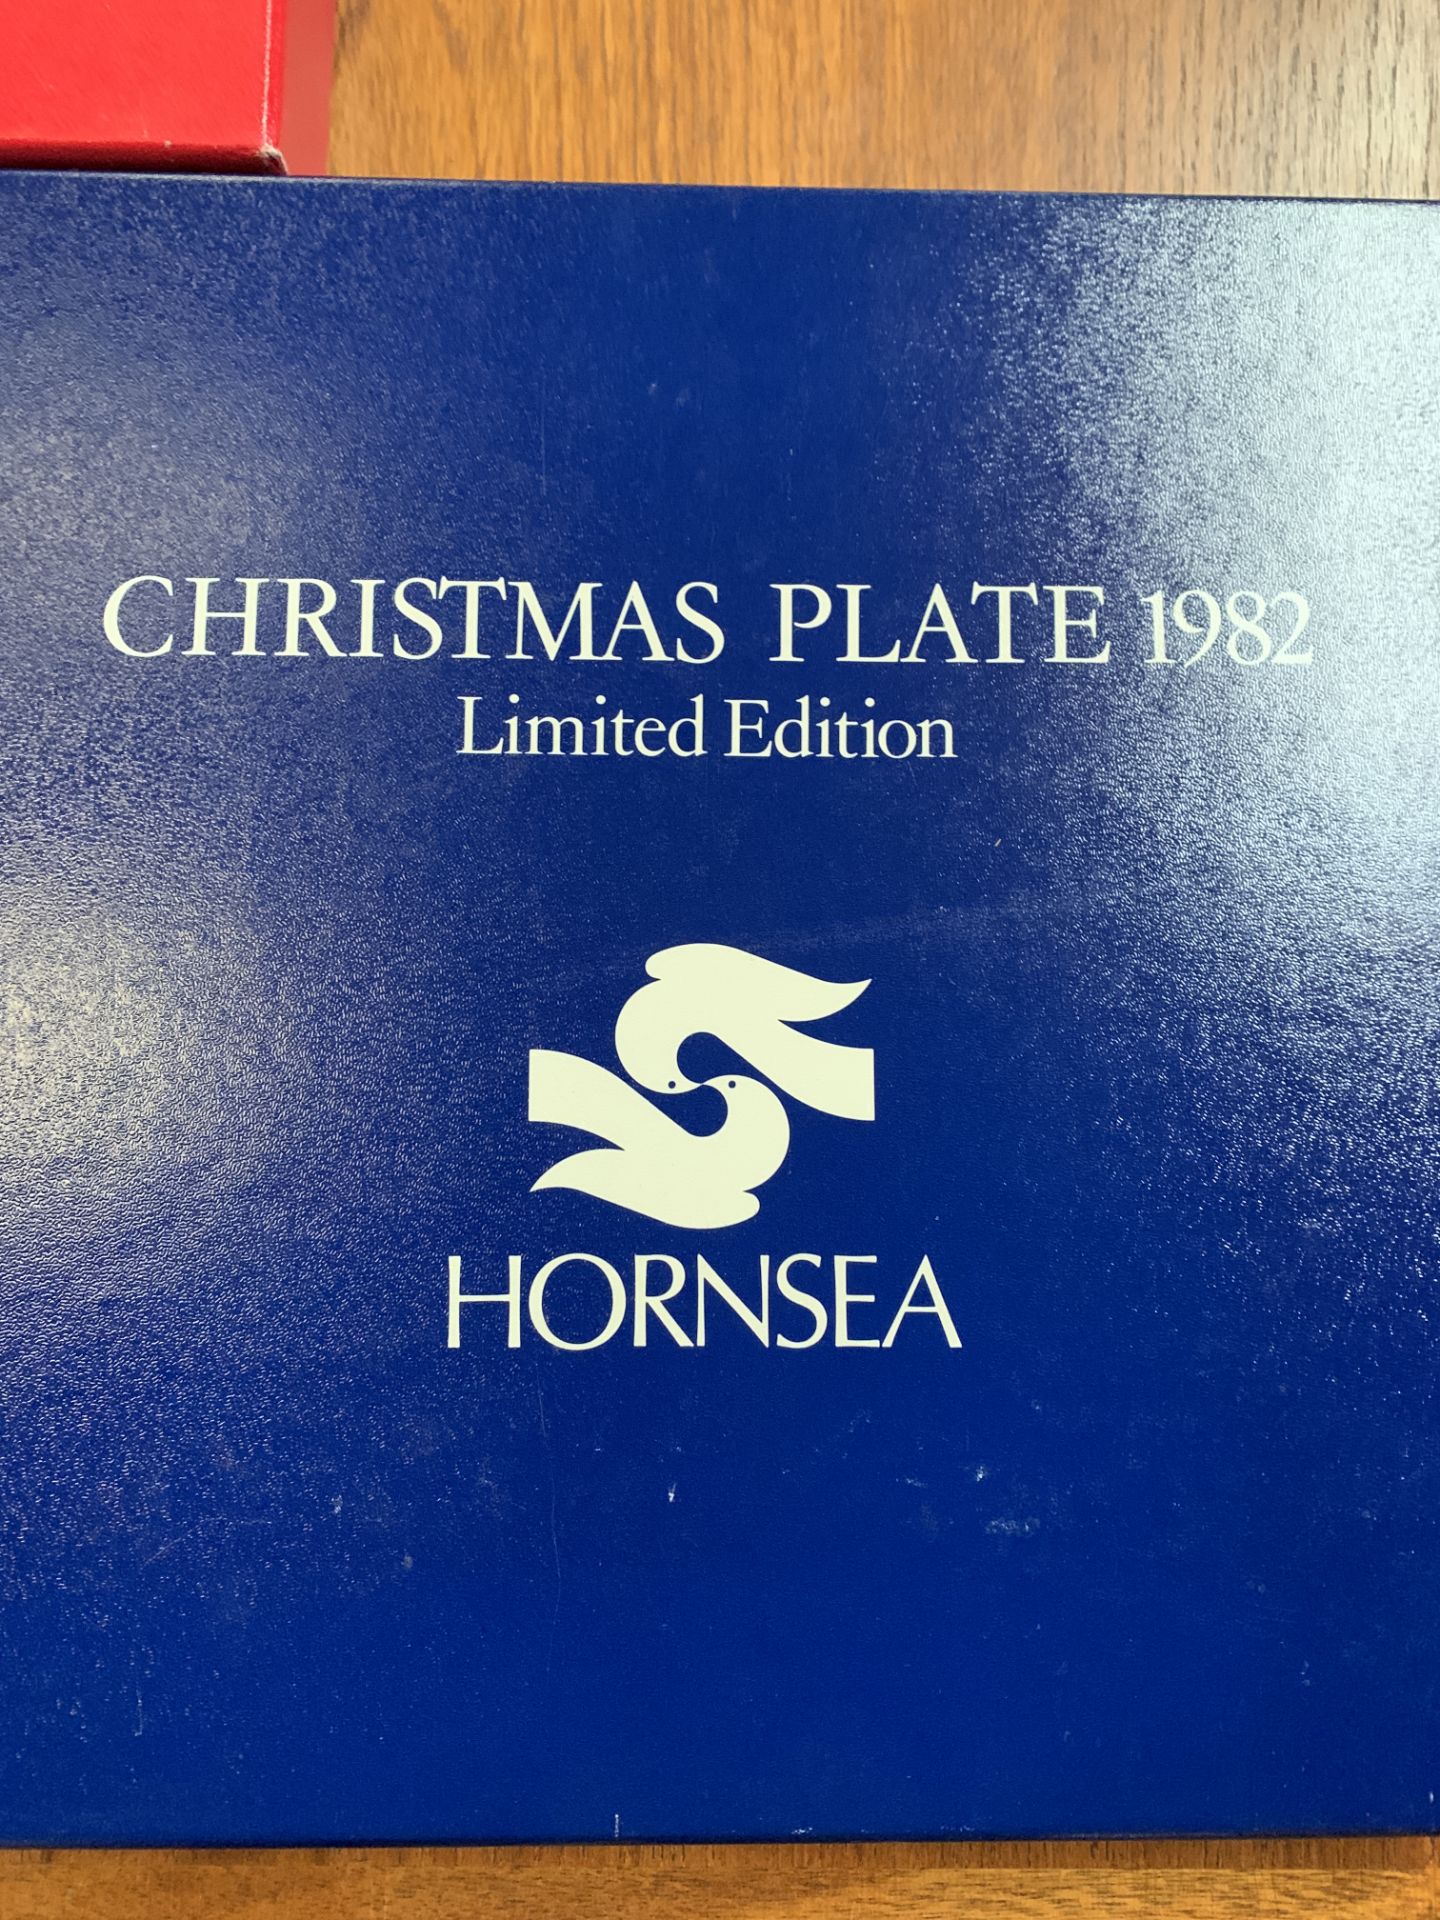 Complete set of nine Hornsea Limited Edition Christmas Plates. - Image 2 of 5